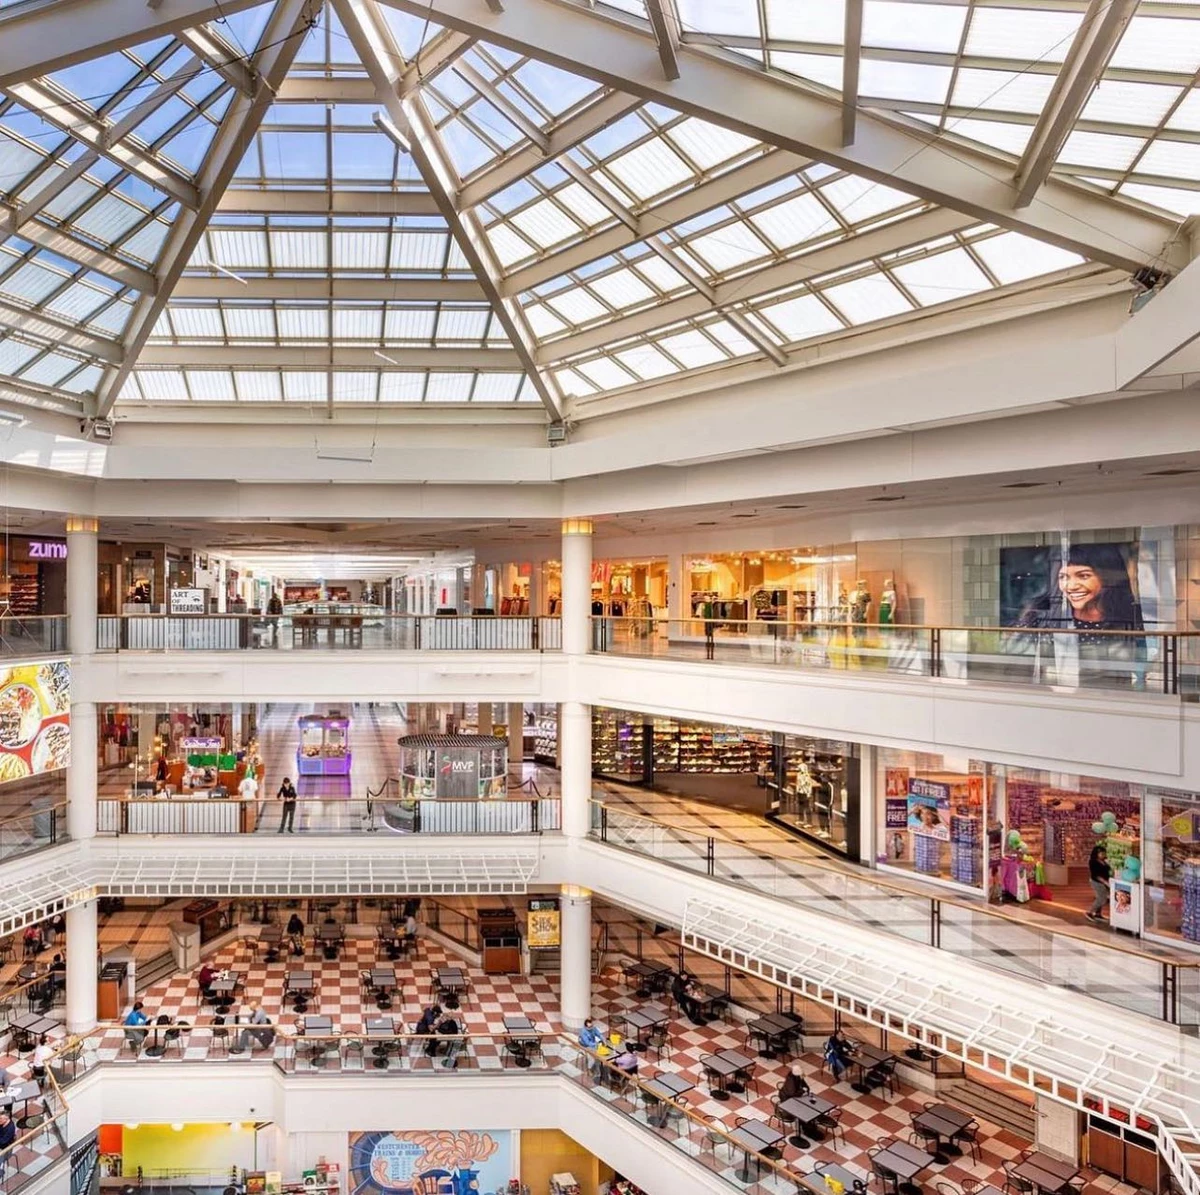 Several new retailers added at The Galleria Mall